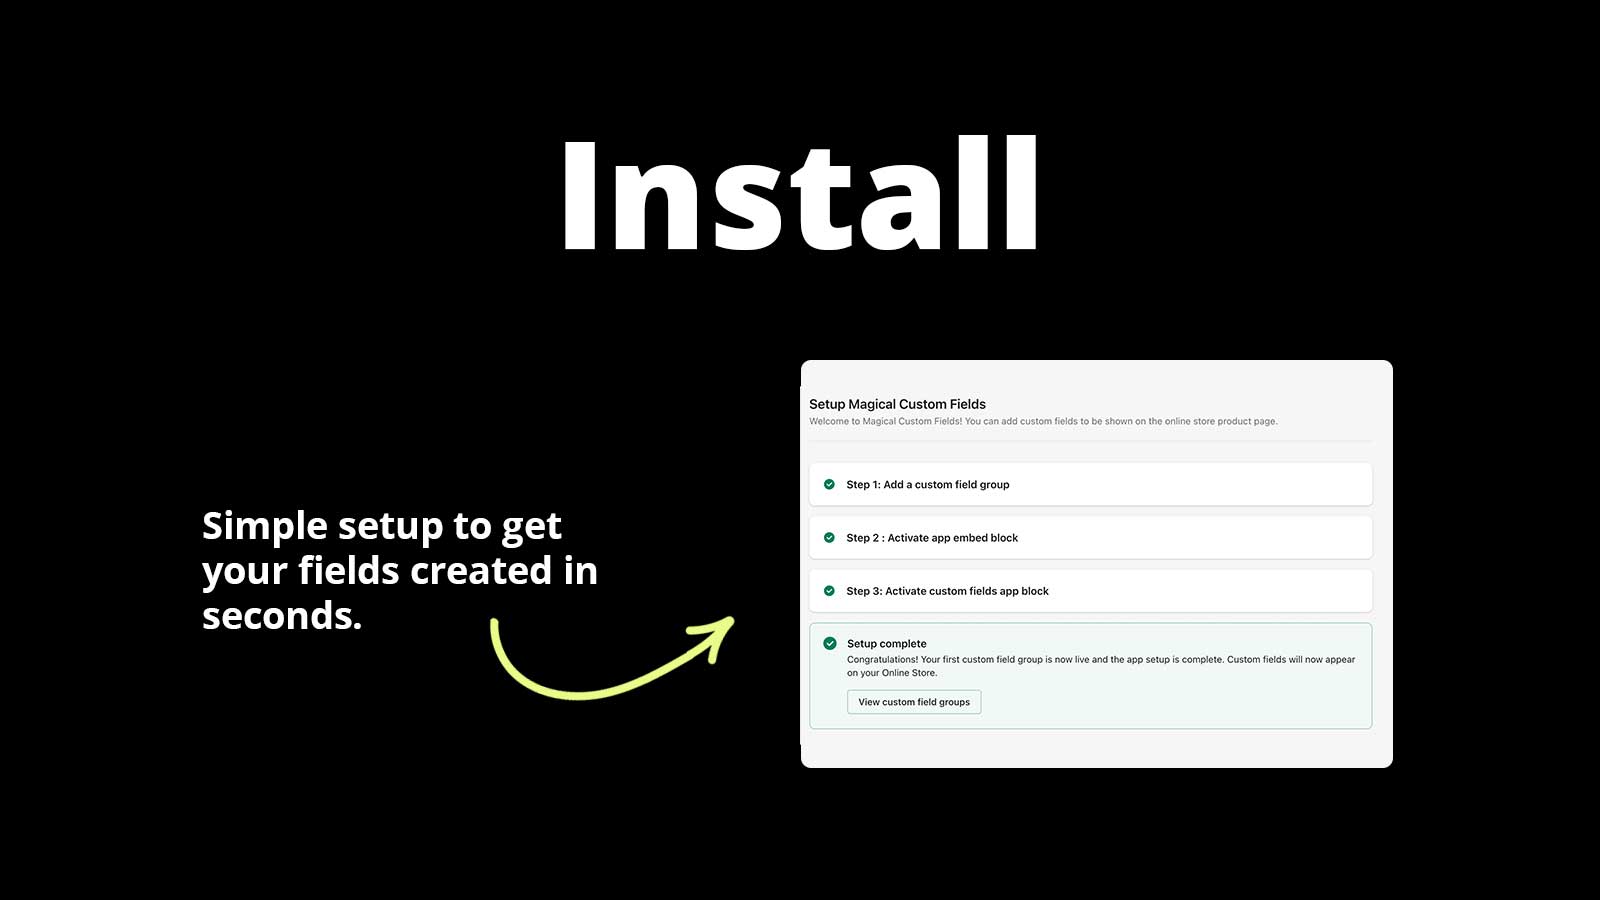 Install. Simple setup to get your fields created in seconds.